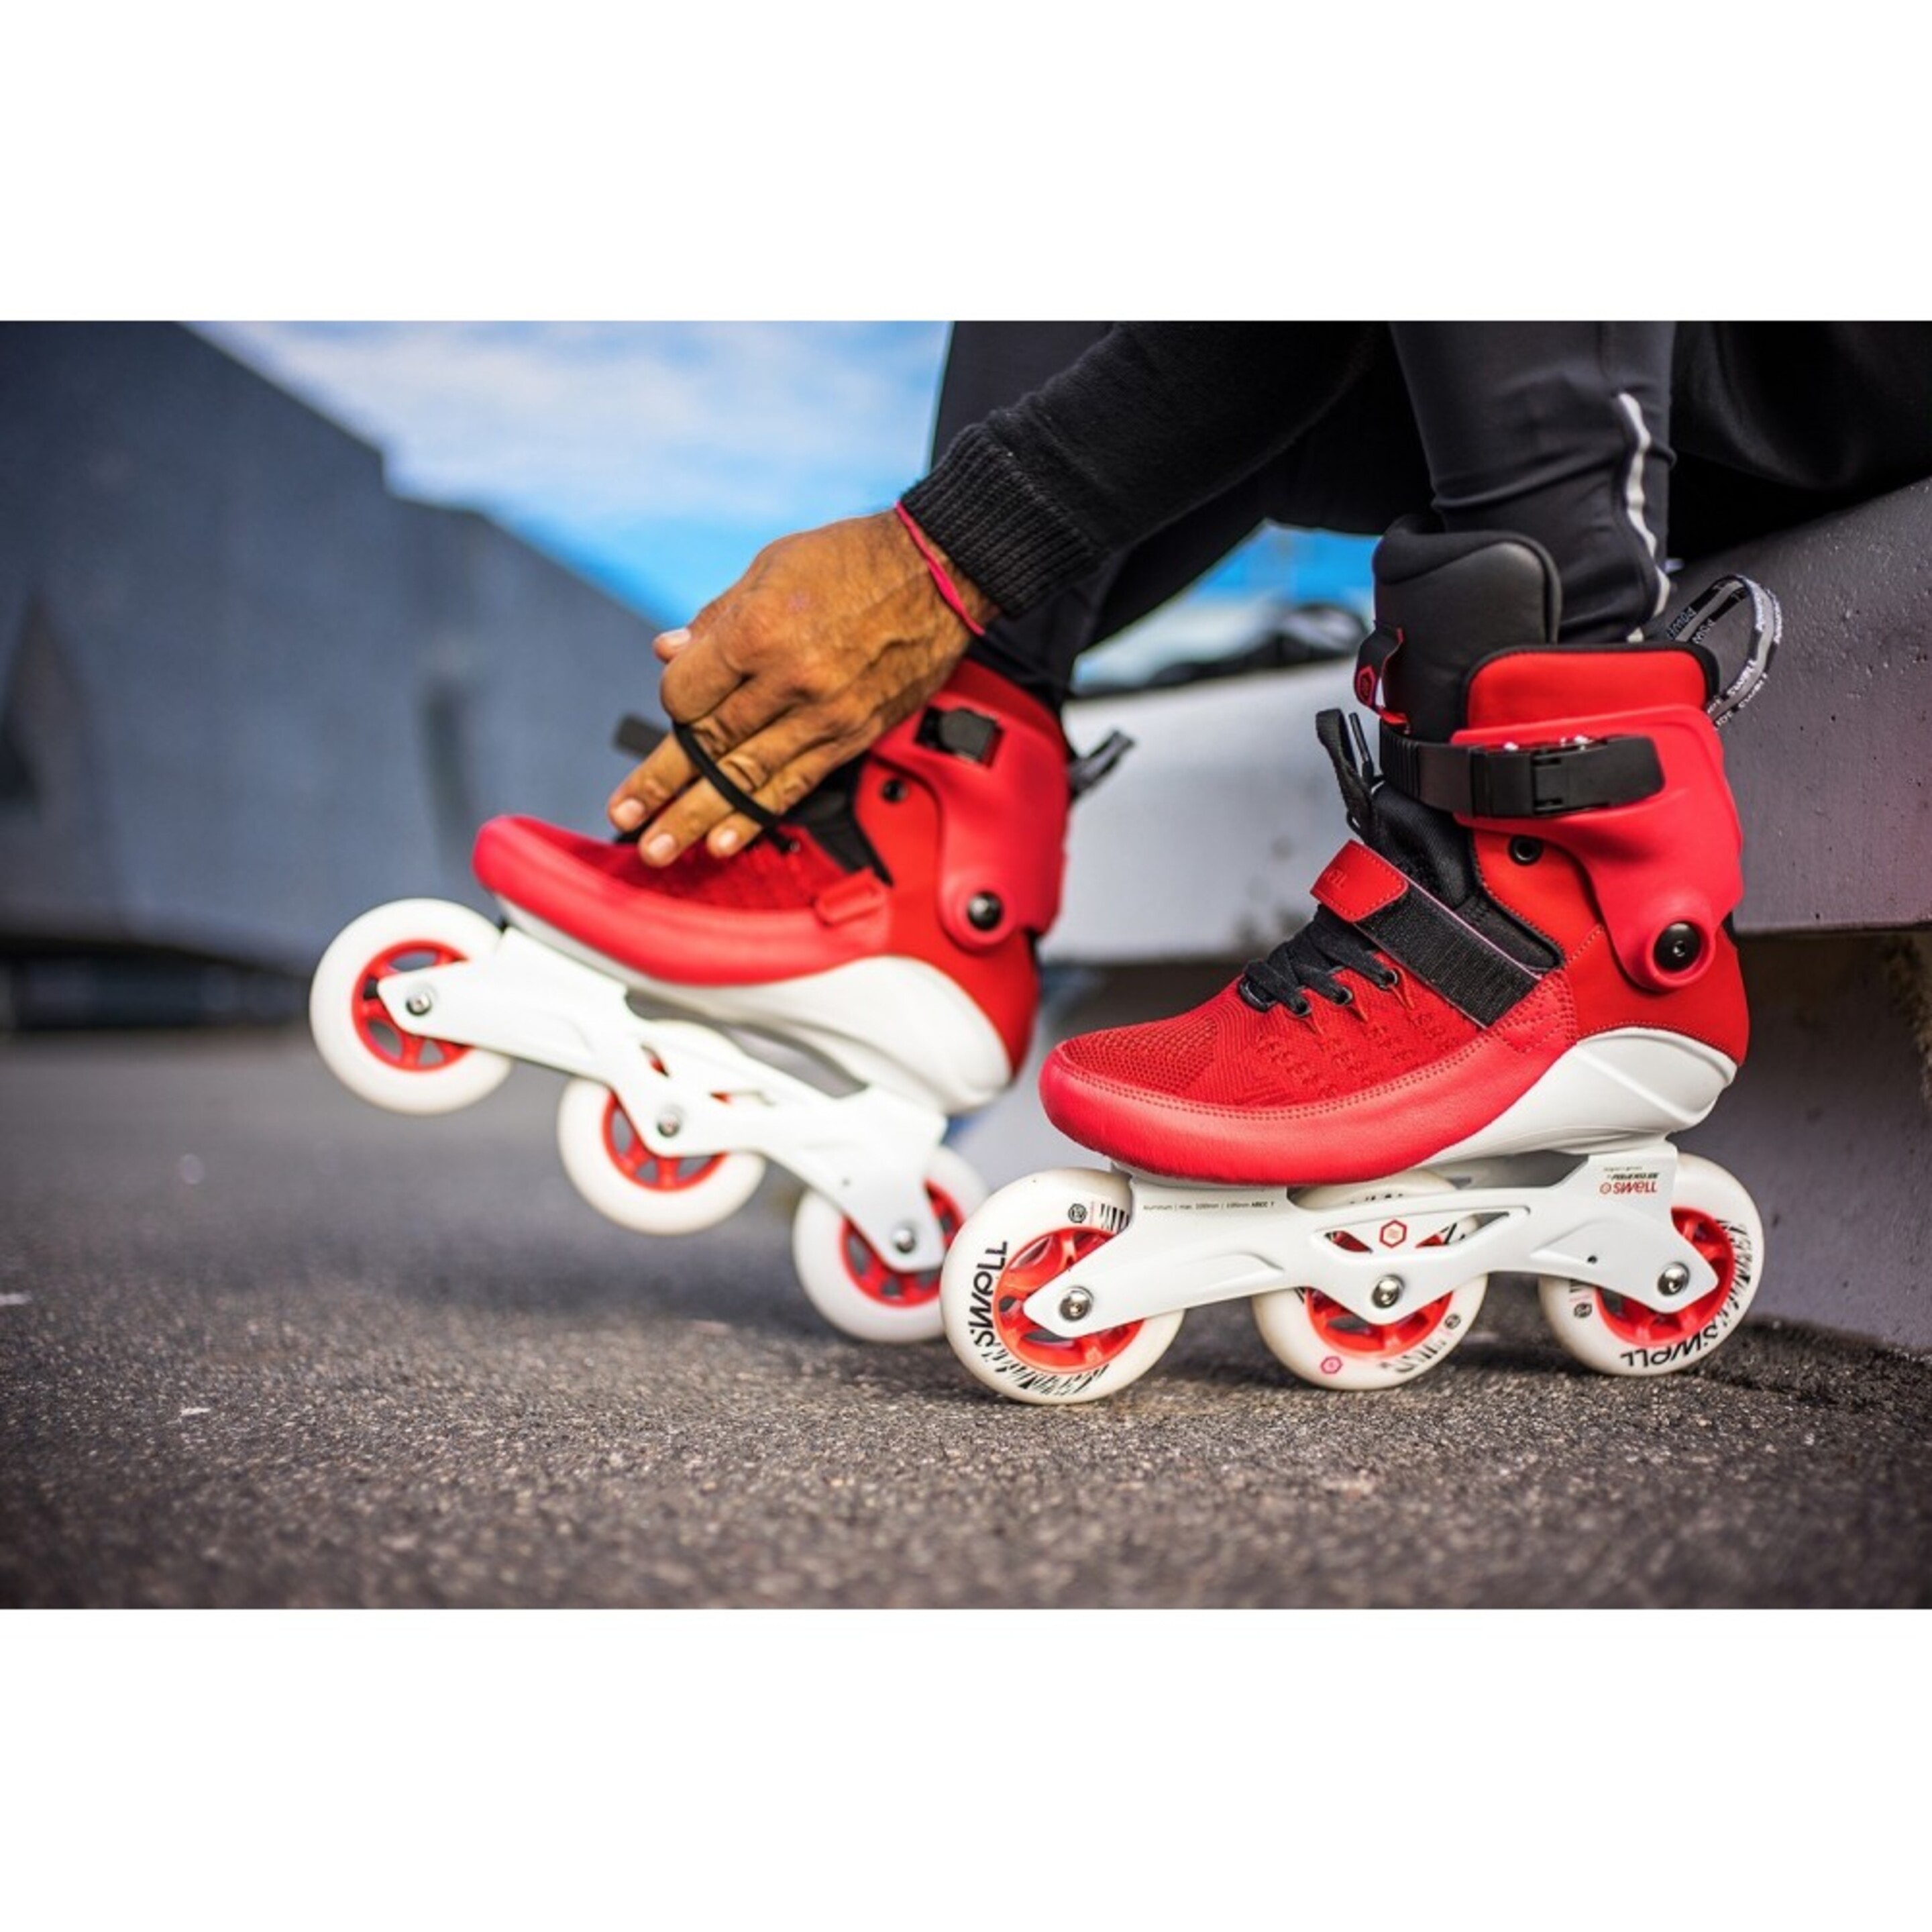 Patines Powerslide Swell 100